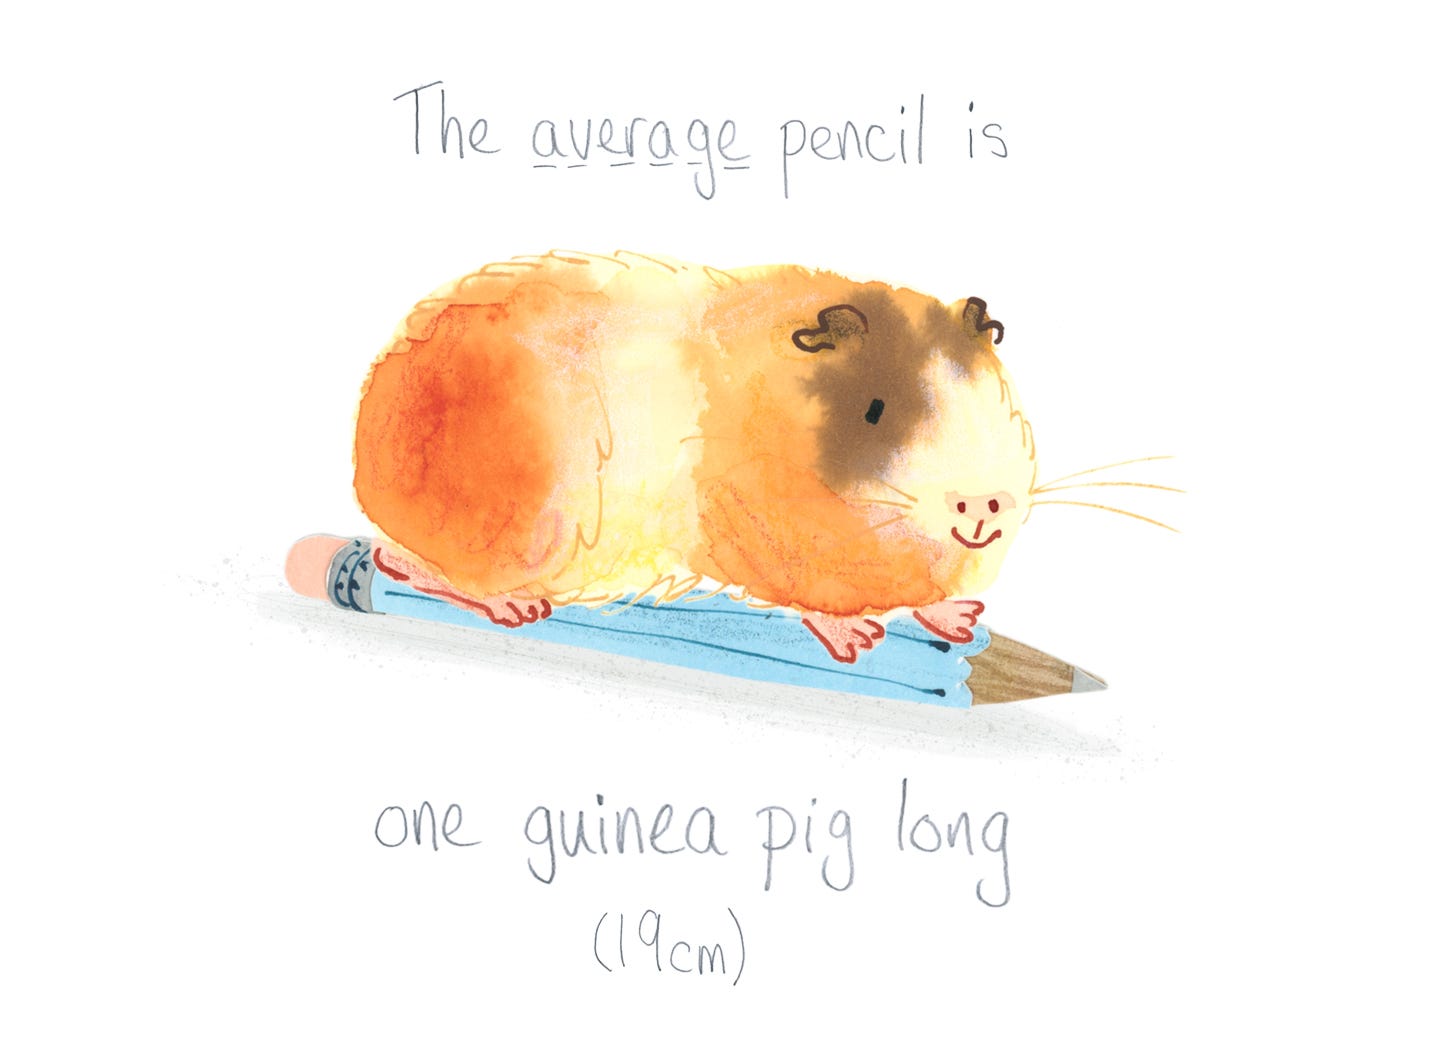 watercolour illustration of a guinea pig on a blue pencil with handwritten text: The average pencil is one guinea pig long (19cm)